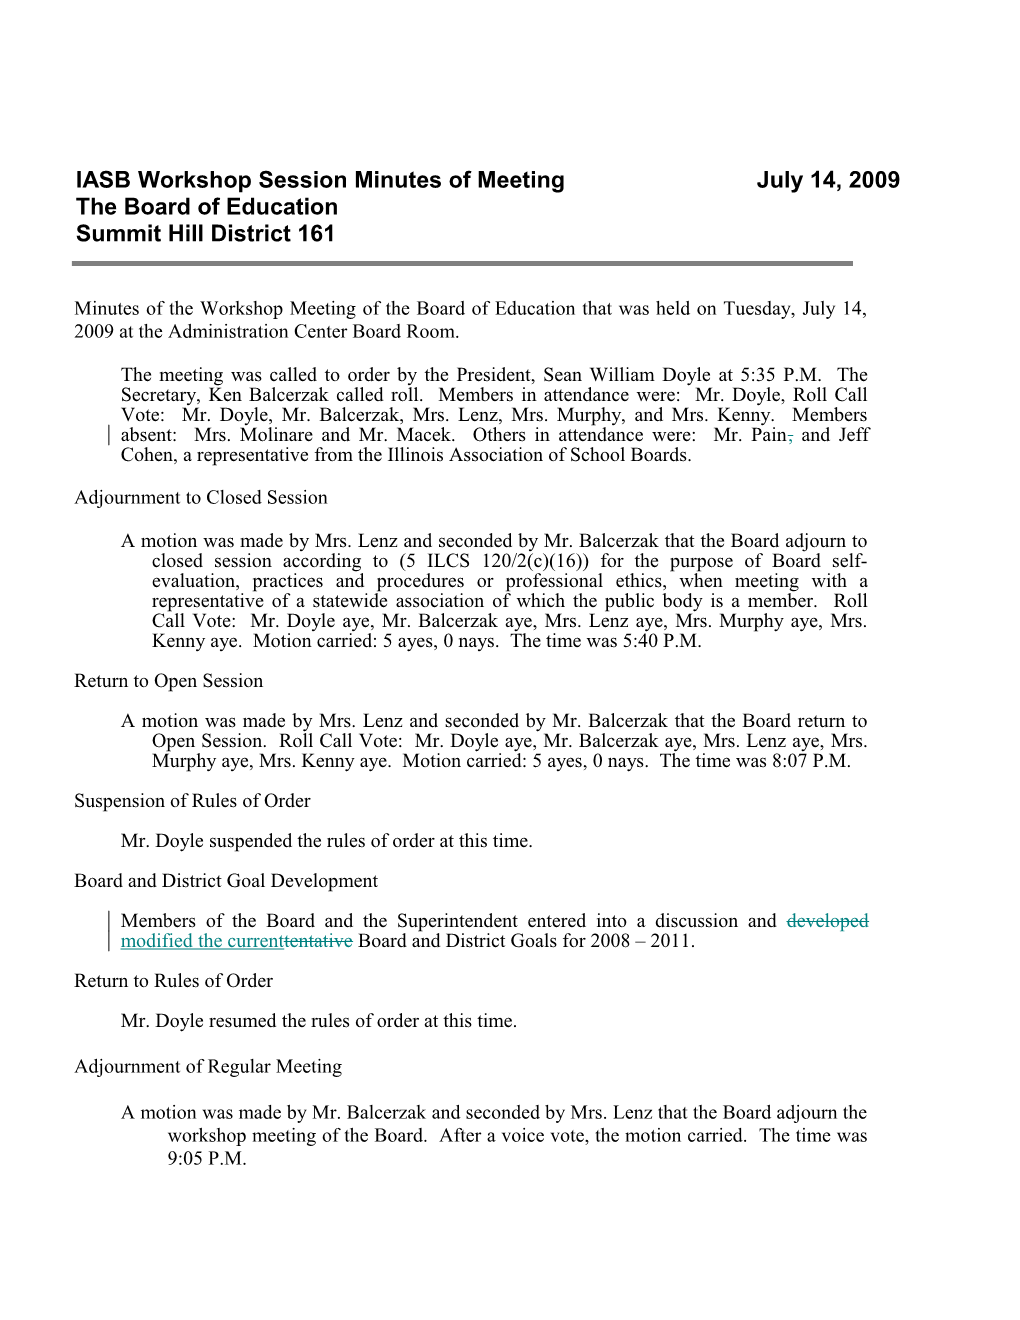 Minutes of the Regular Session Meeting of the Board of Education That Was Held on Wednesday